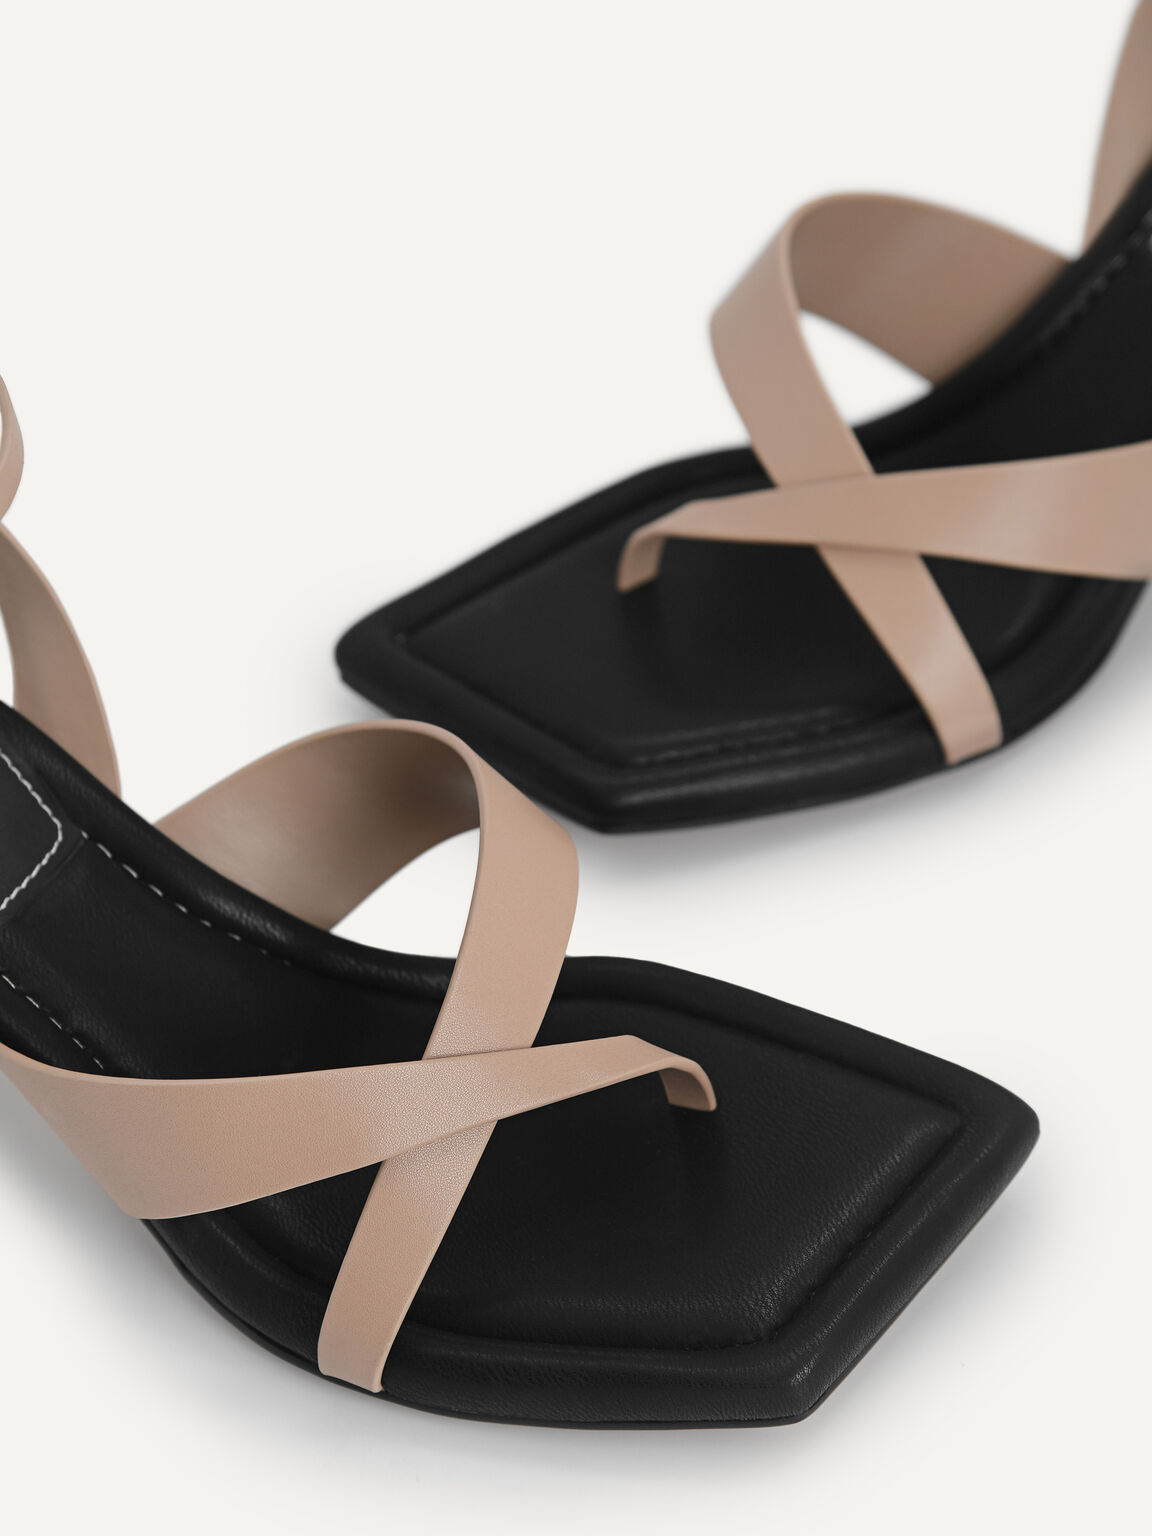 Strappy Square-Toe Heel Sandals, Taupe